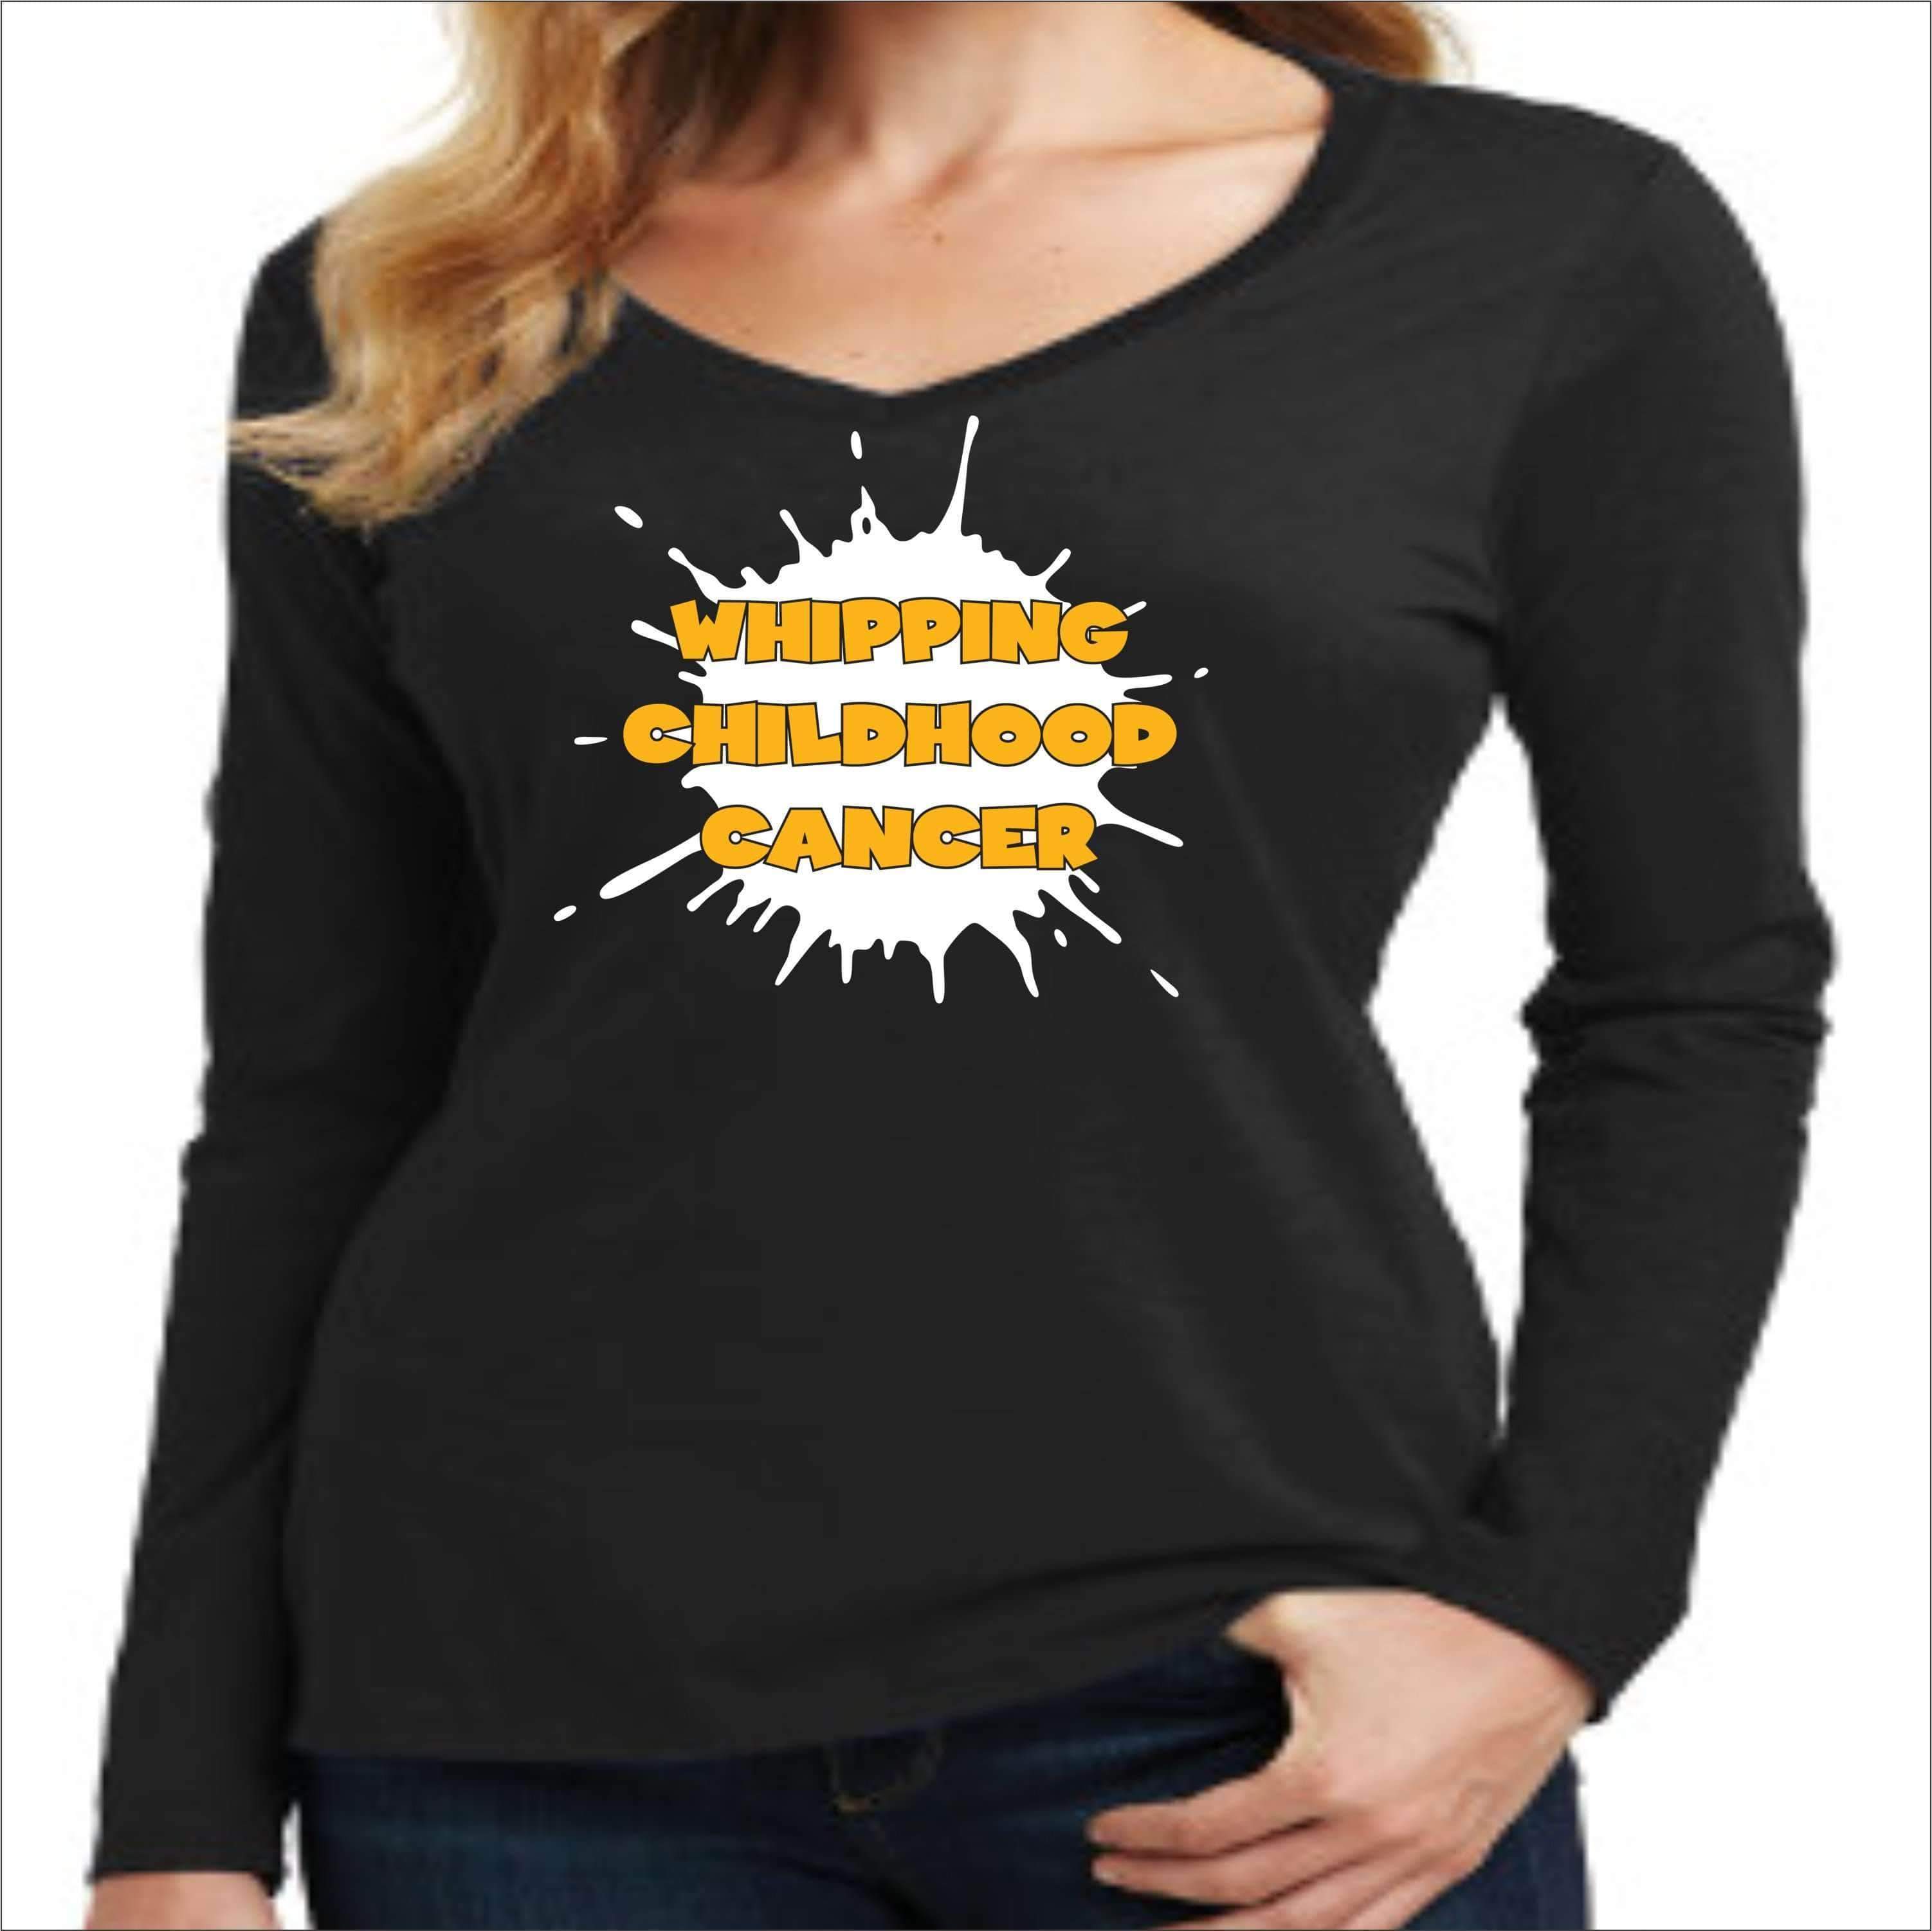 Whipping Childhood Cancer Long Sleeve V-Neck Screen Printed T-Shirt VIEW ALL DESIGNS Becky's Boutique Womens Extra-small Black 